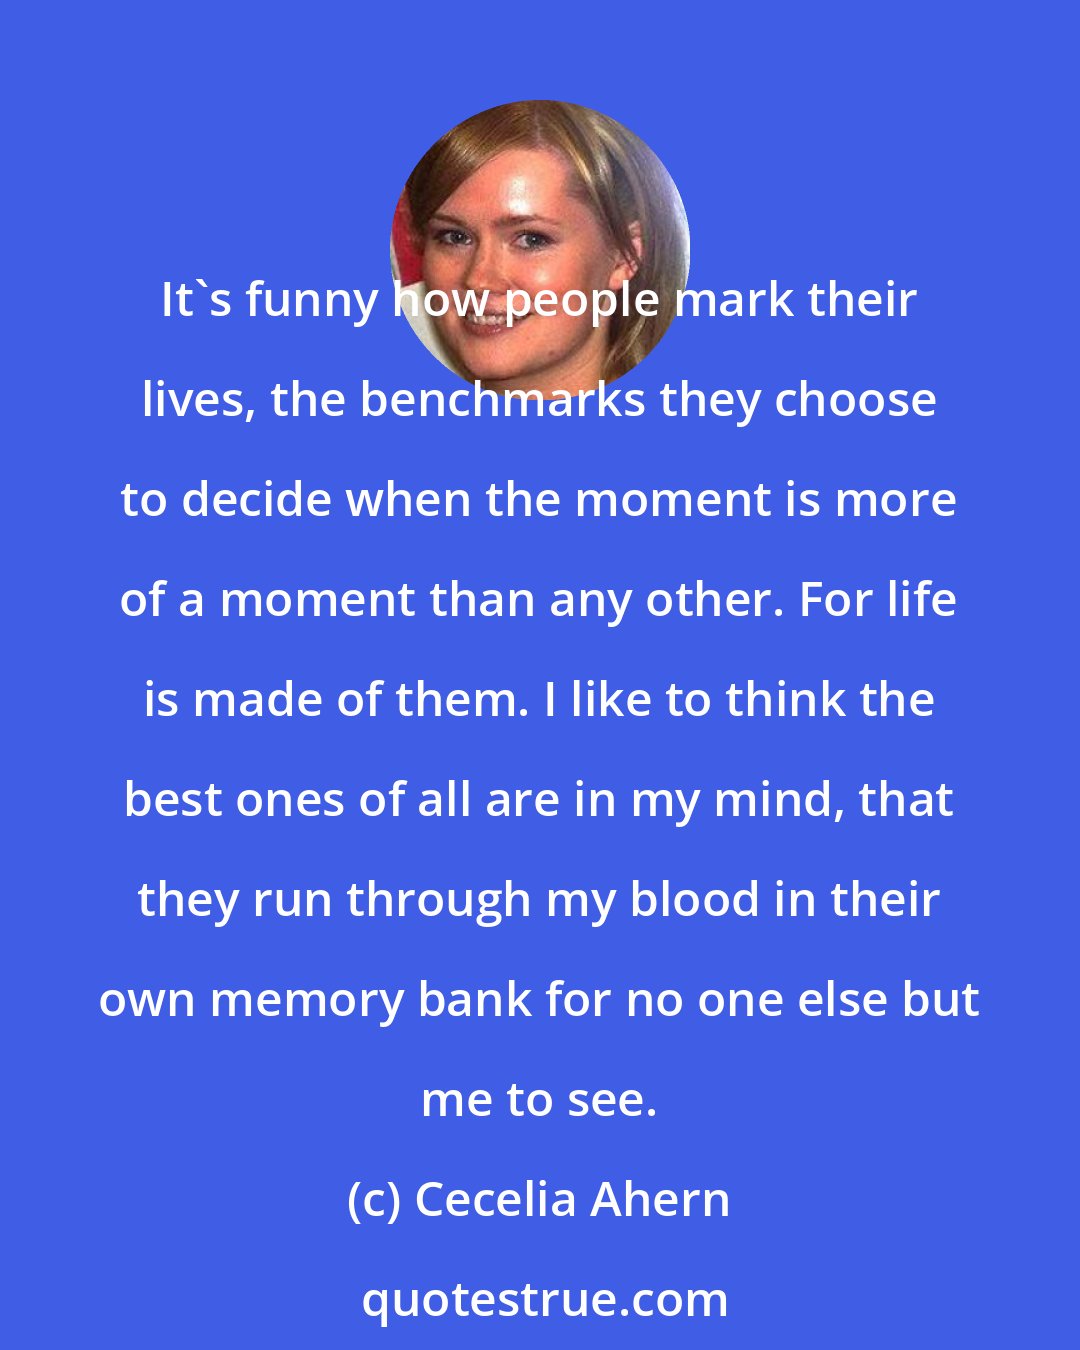 Cecelia Ahern: It's funny how people mark their lives, the benchmarks they choose to decide when the moment is more of a moment than any other. For life is made of them. I like to think the best ones of all are in my mind, that they run through my blood in their own memory bank for no one else but me to see.